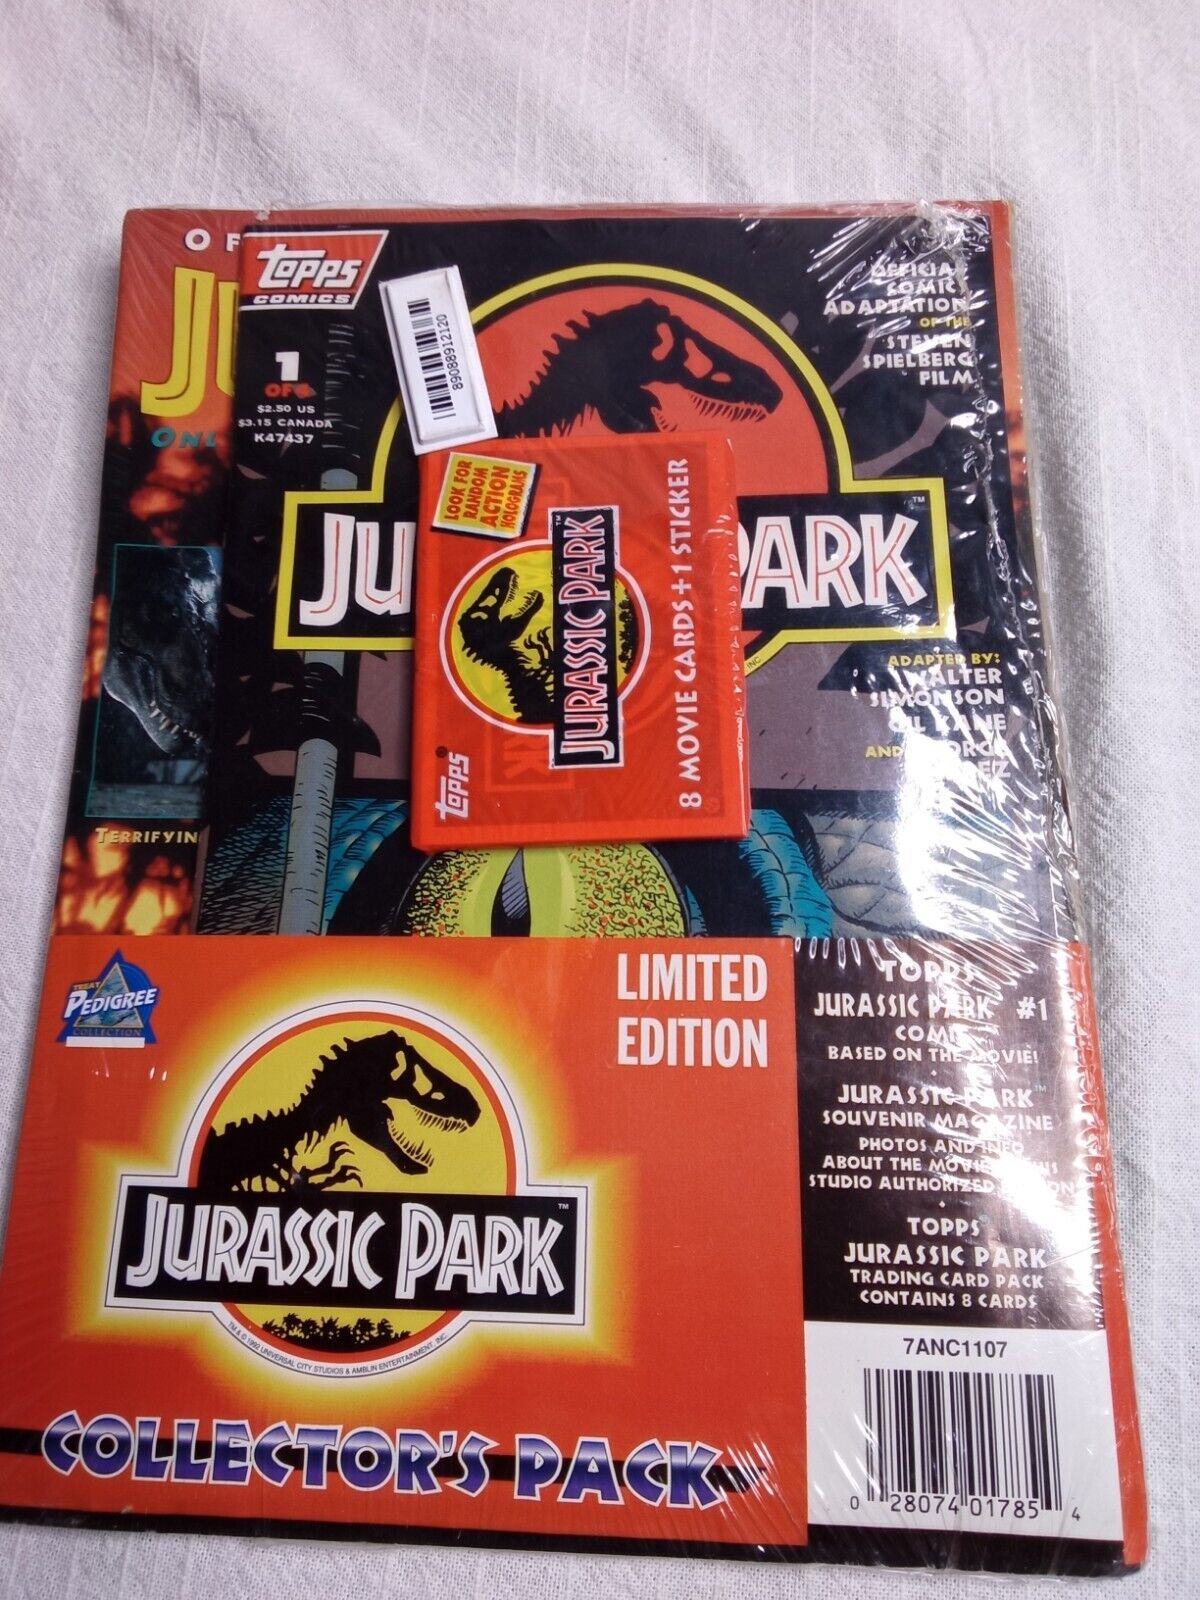 Vtg 1993 Jurassic Park Collector's Pack Topps Limited Edition Comic, Cards NEW